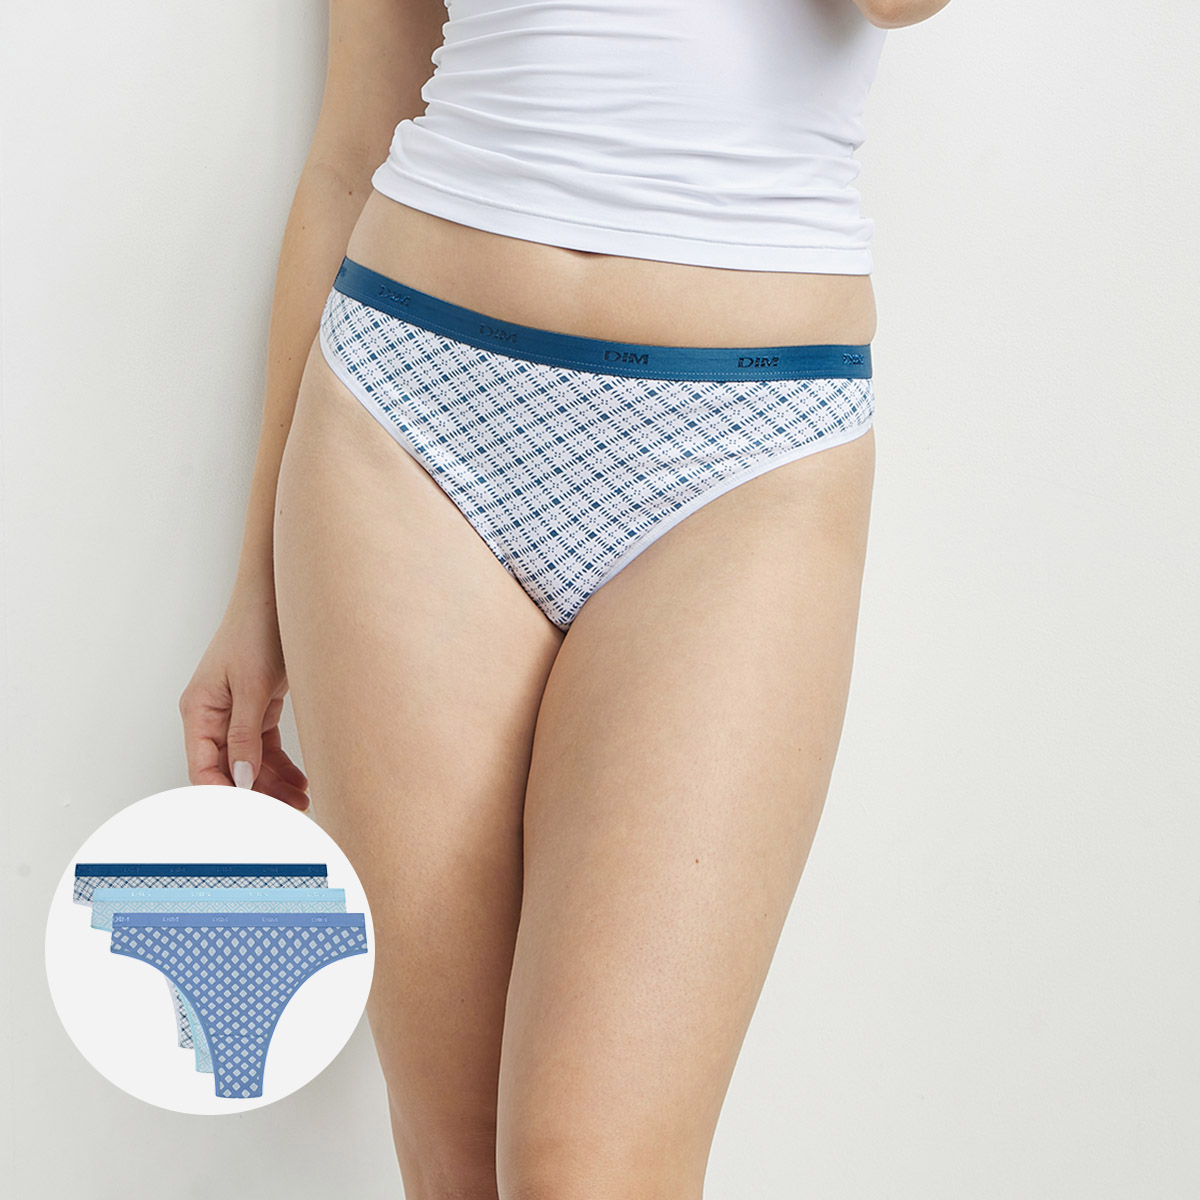 Set of 3 cotton thongs with geometric patterns Turquoise Les Pockets